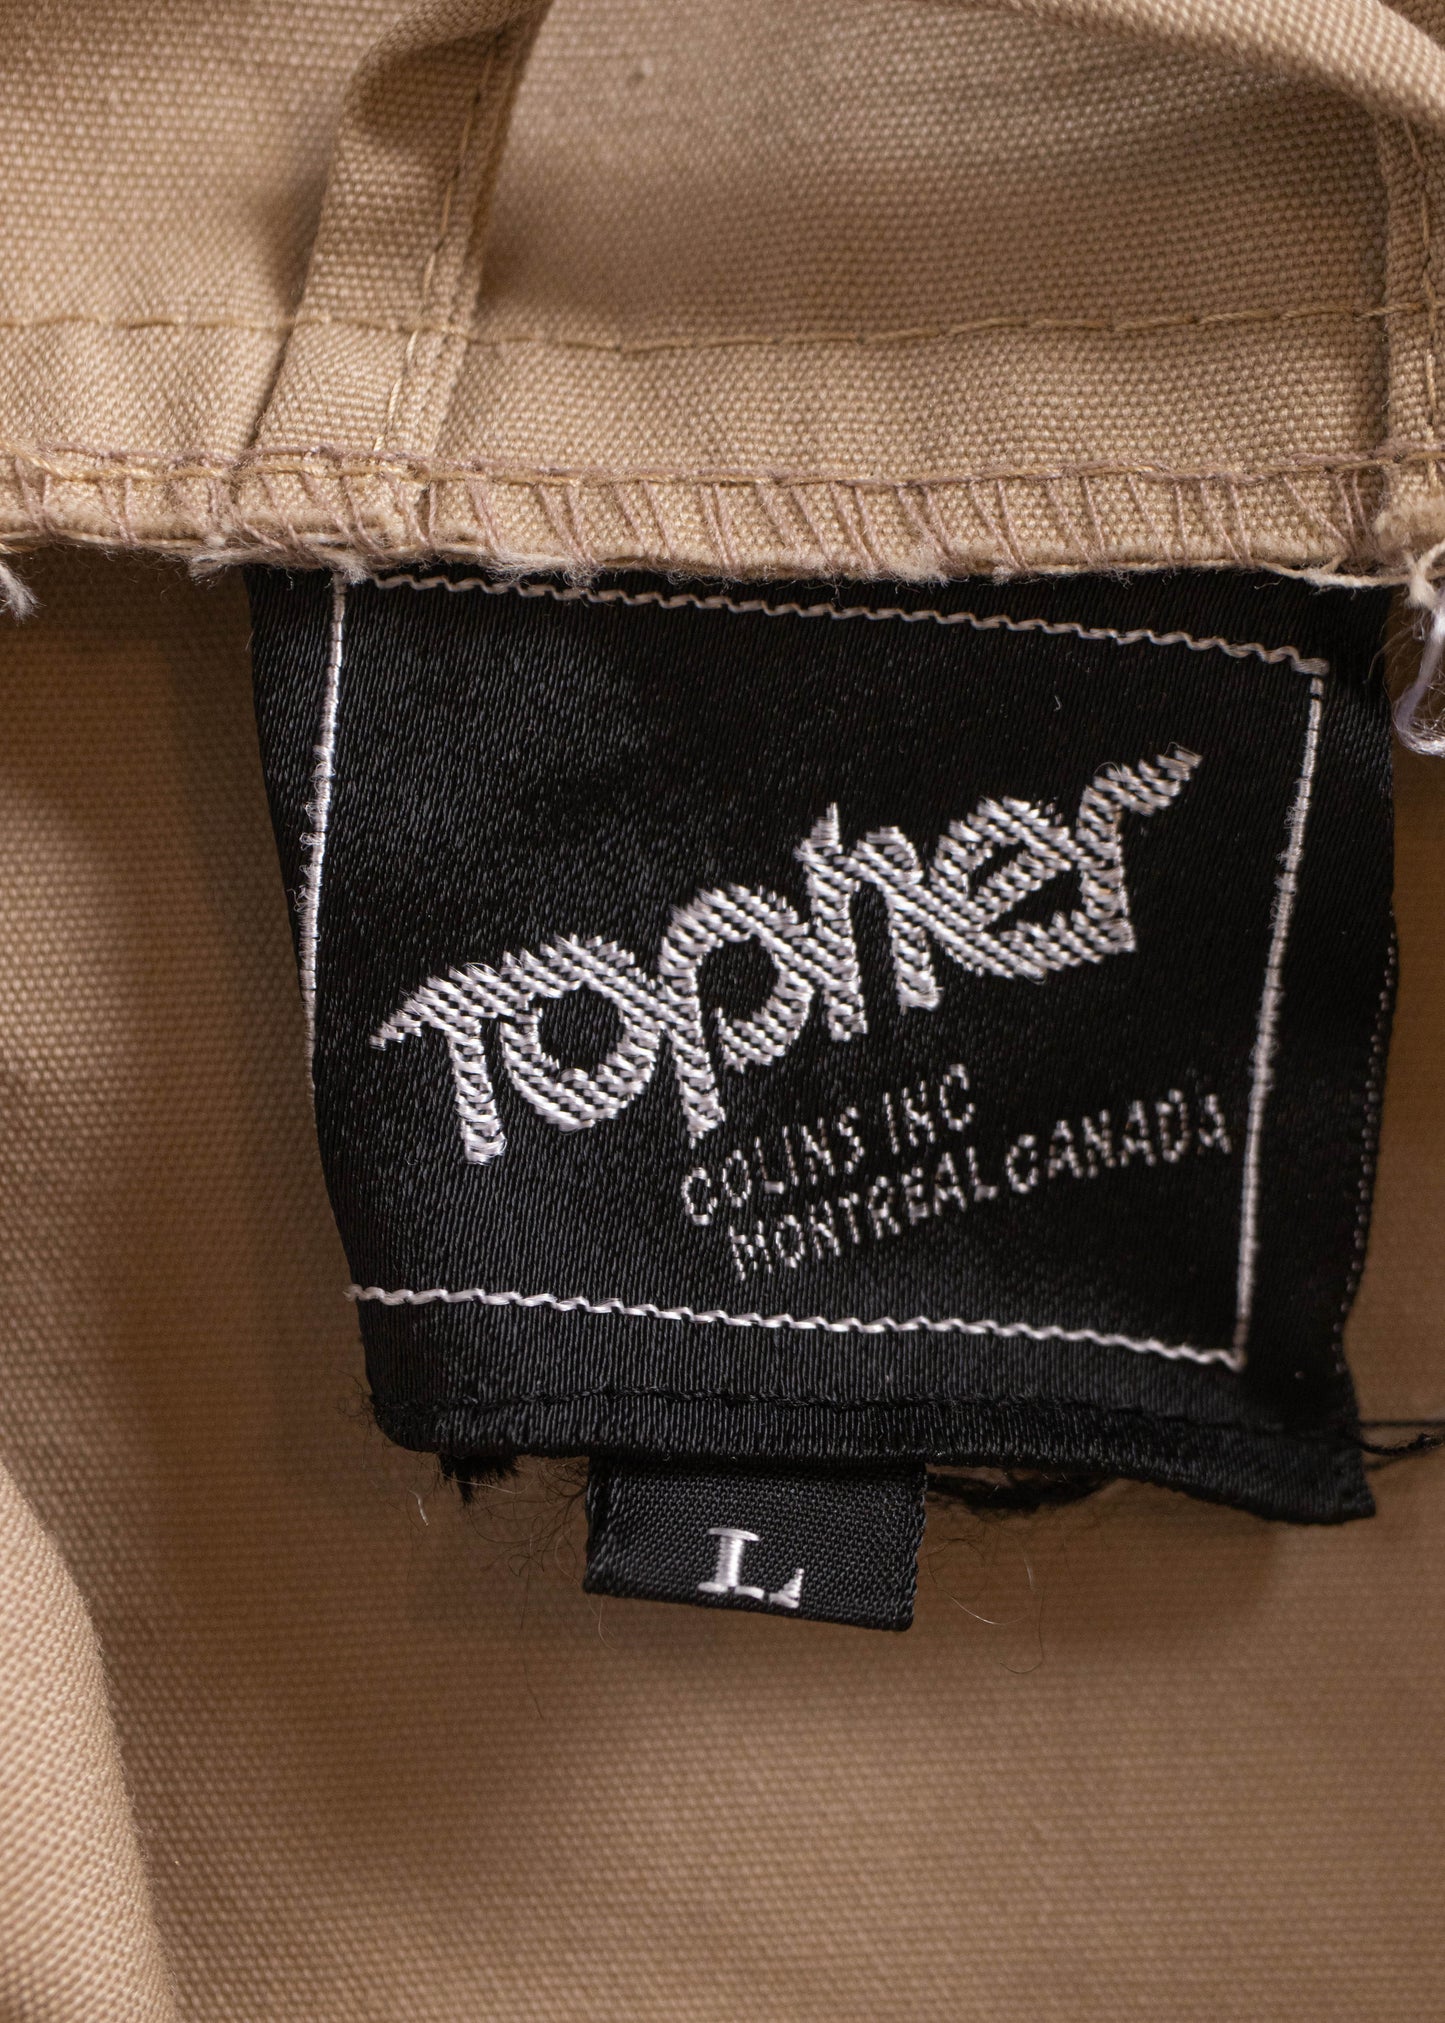 1980s Topher Pullover Anorak Jacket Size M/L